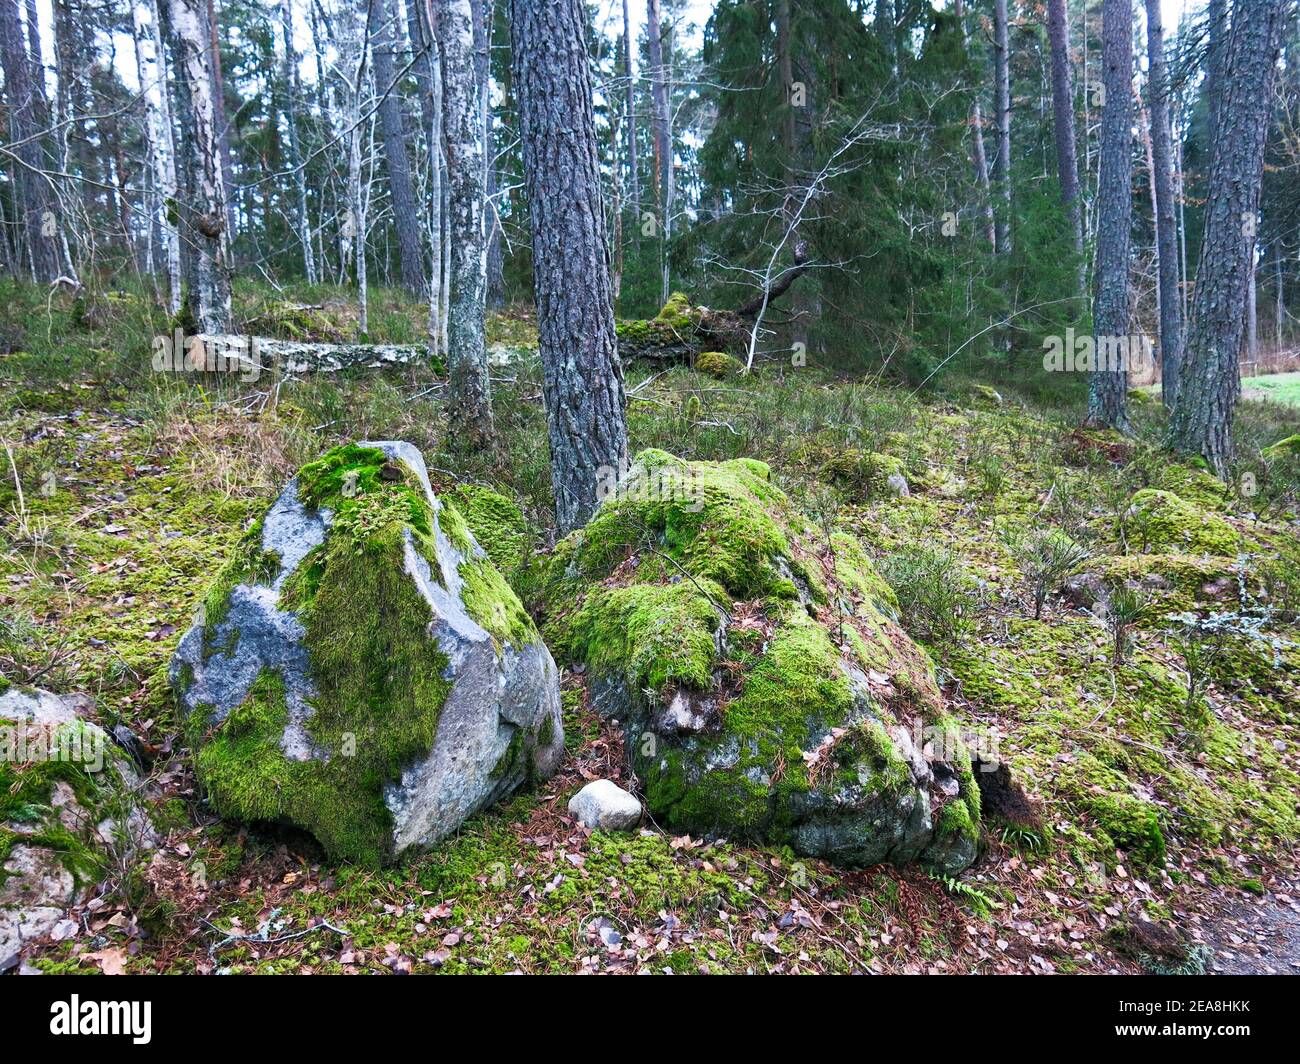 MOSSES  Bryophyta on stones in forest Stock Photo